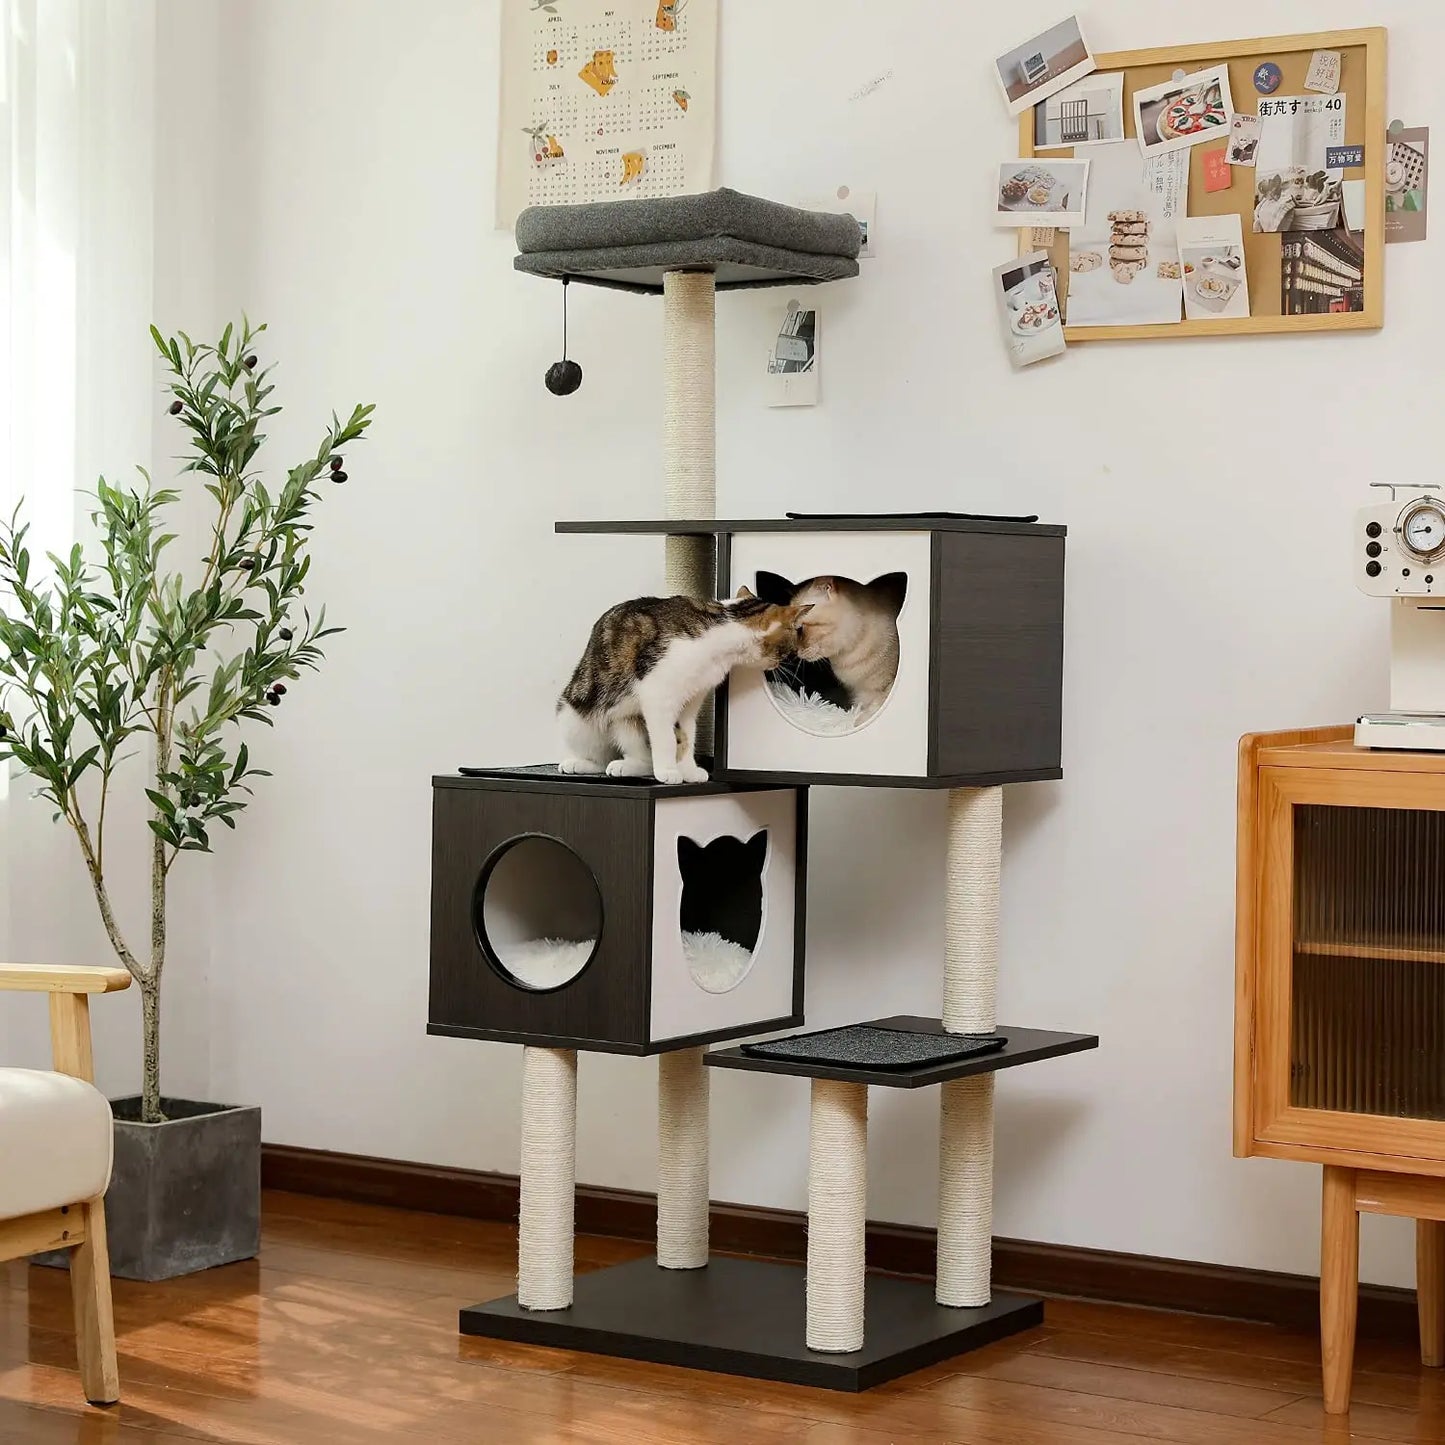 147cm Chic & Modern Cat Tree - Elegant Design with Playful Features